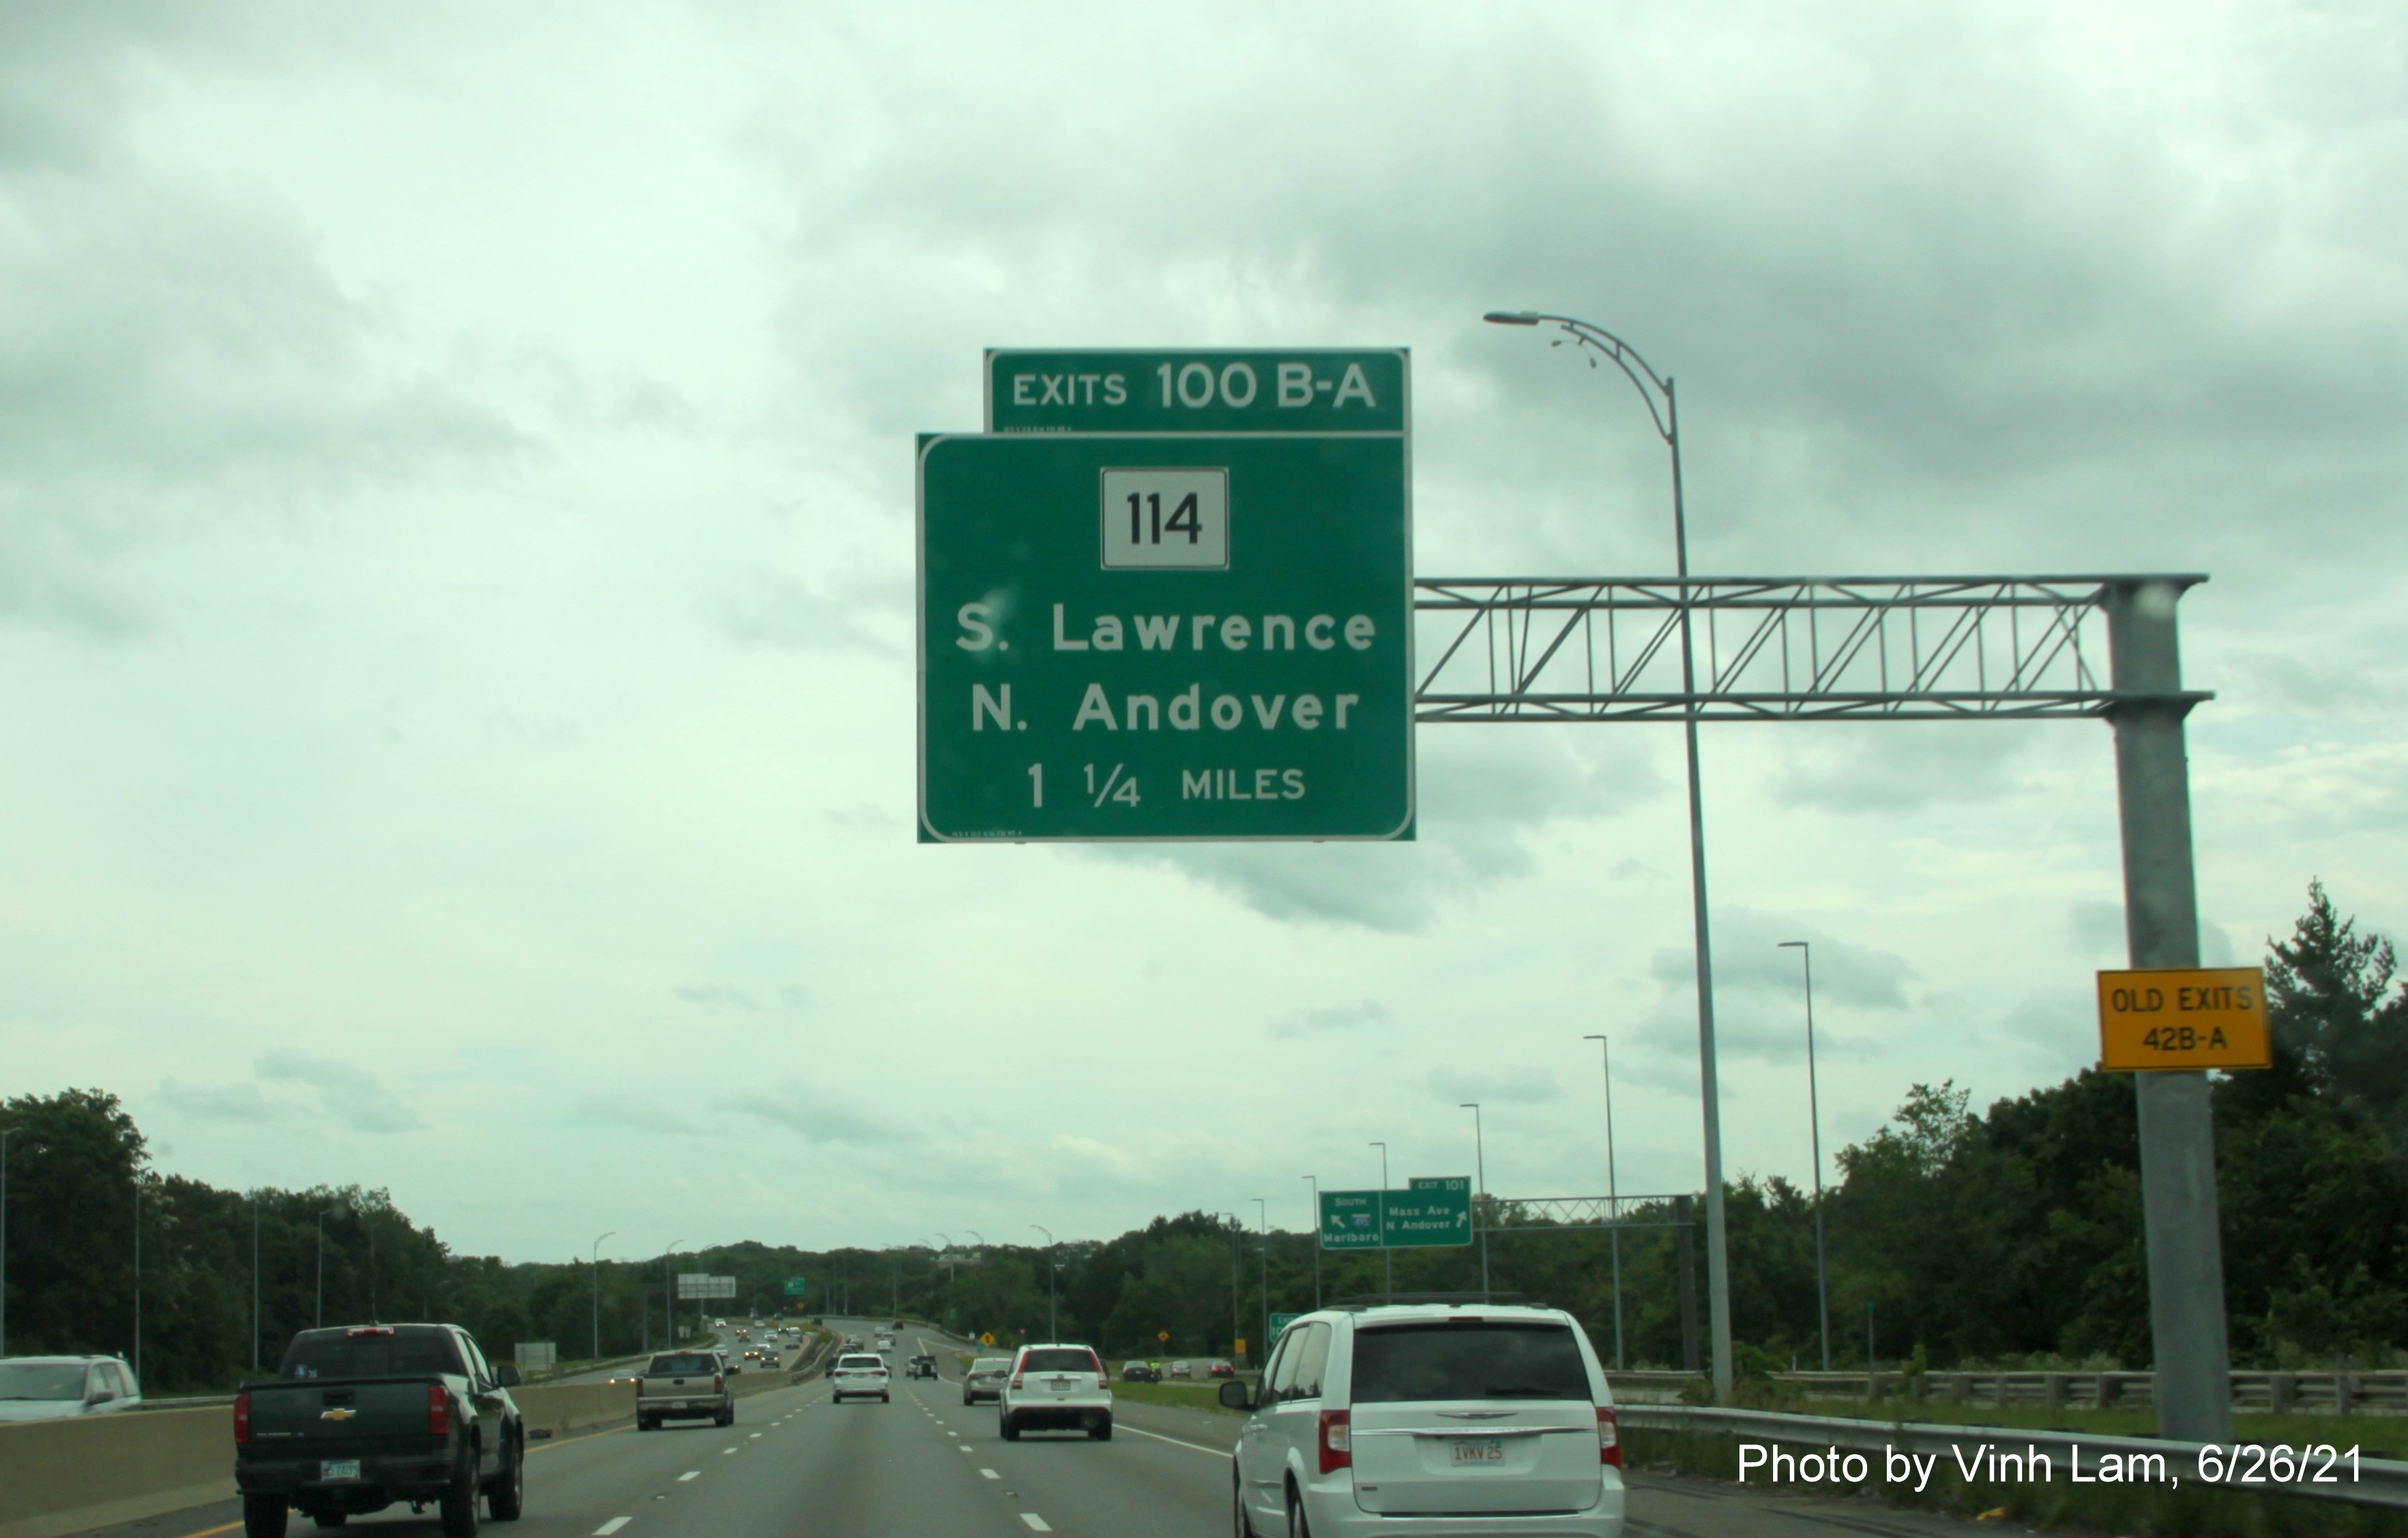 Image of 1 mile advance overhead sign for MA 114 exits with new milepost exit numbers and yellow Old Exits 42B-A advisory sign on support on I-495 South in Lawrence, by Vinh Lam, June 2021